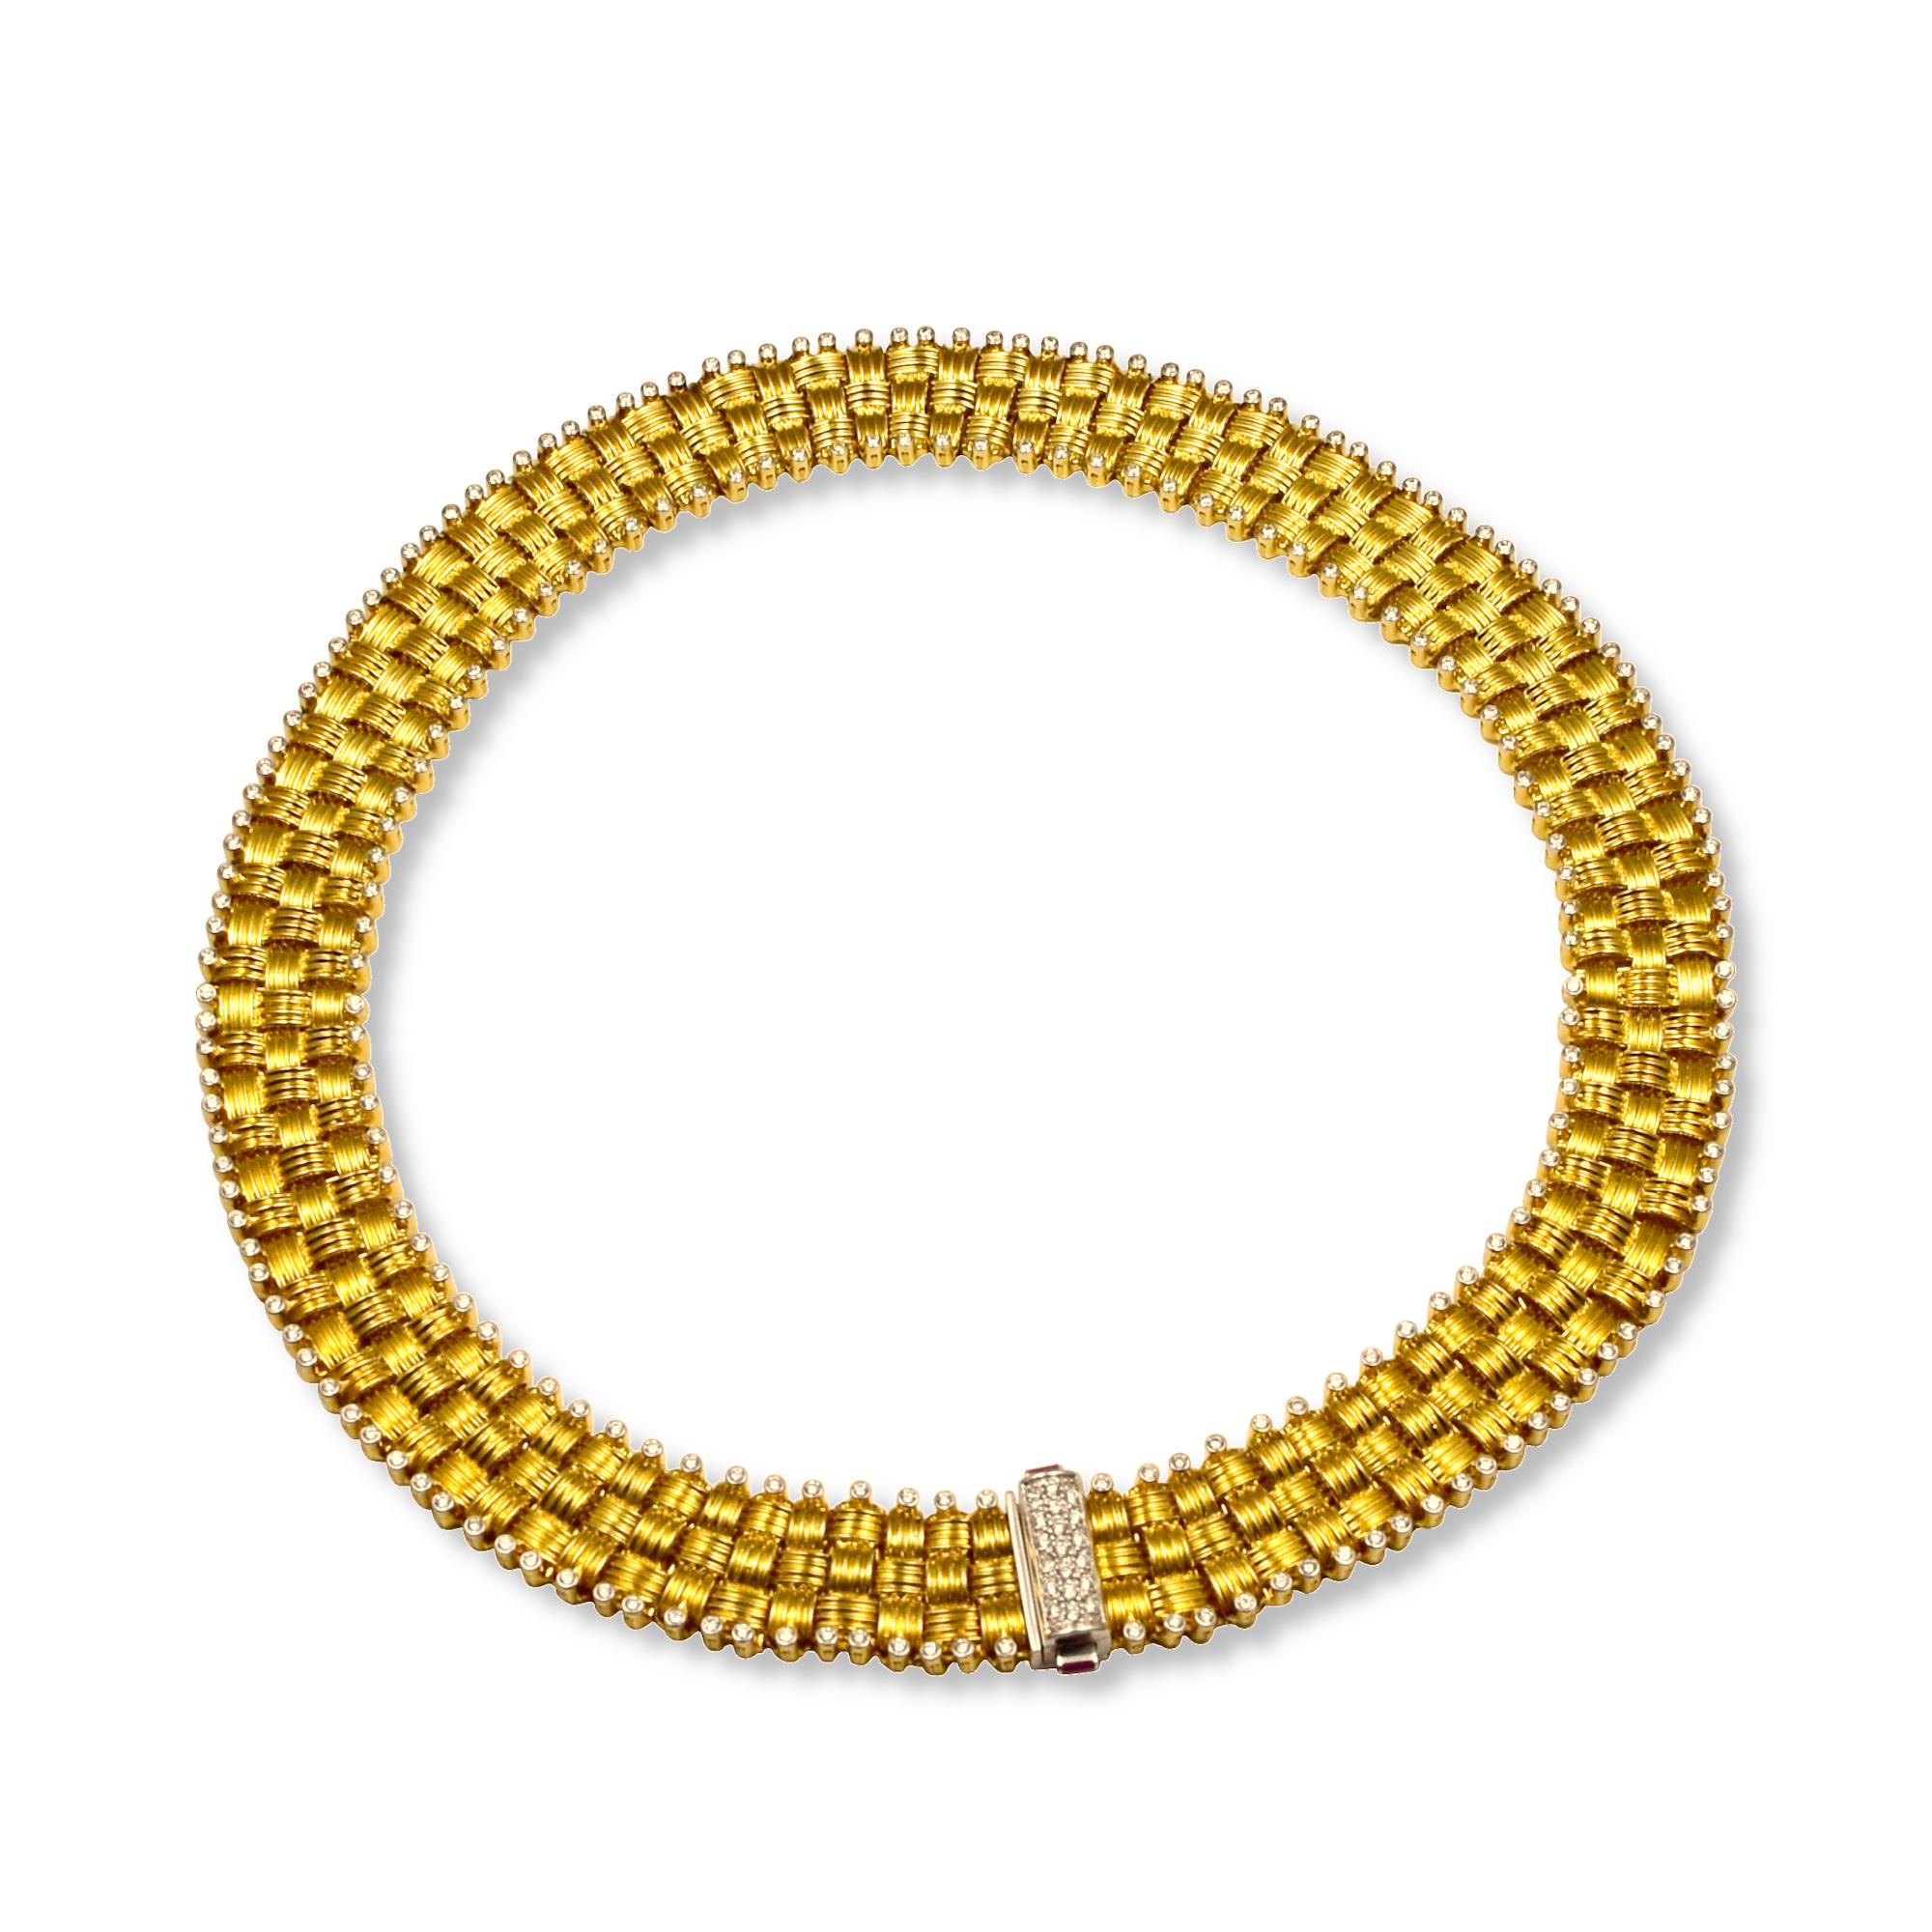 Designer: Roberto Coin  

Collection: Appassionata 

Style: Set of 4 : Earrings, Ring, Necklace, Bracelet 

Metal: Yellow  Gold 

Metal Purity: 18k



Bracelet Stones: 153 Diamonds, 3 Rubies,

Bracelet Dimensions: 7.5 inch  x 1 inch